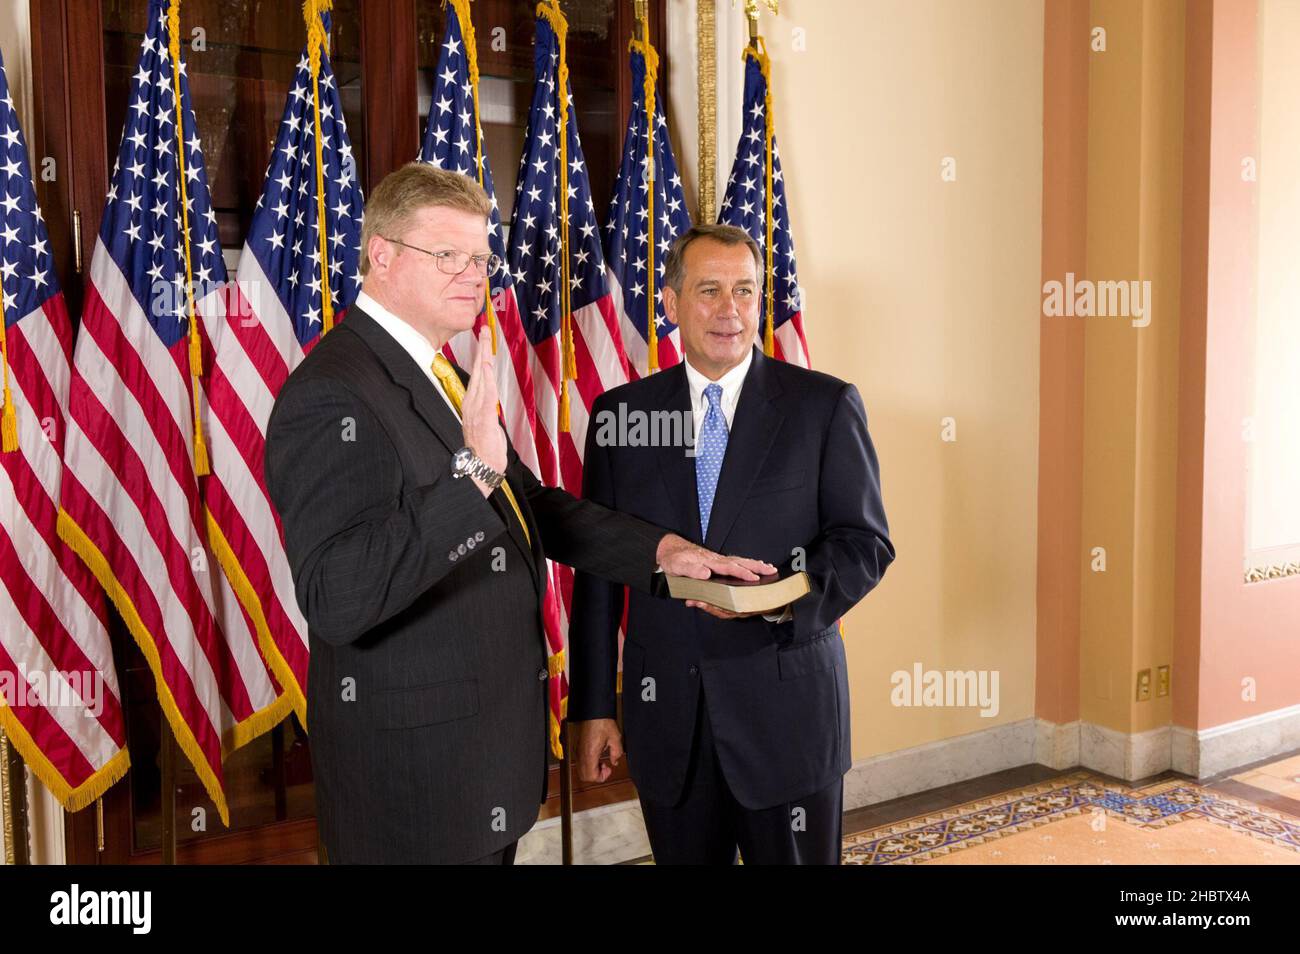 Congressman Mark Amodei (R-NV) being sworn-in by Speaker of the House John Boehner (R-OH) ca.  2011 Stock Photo